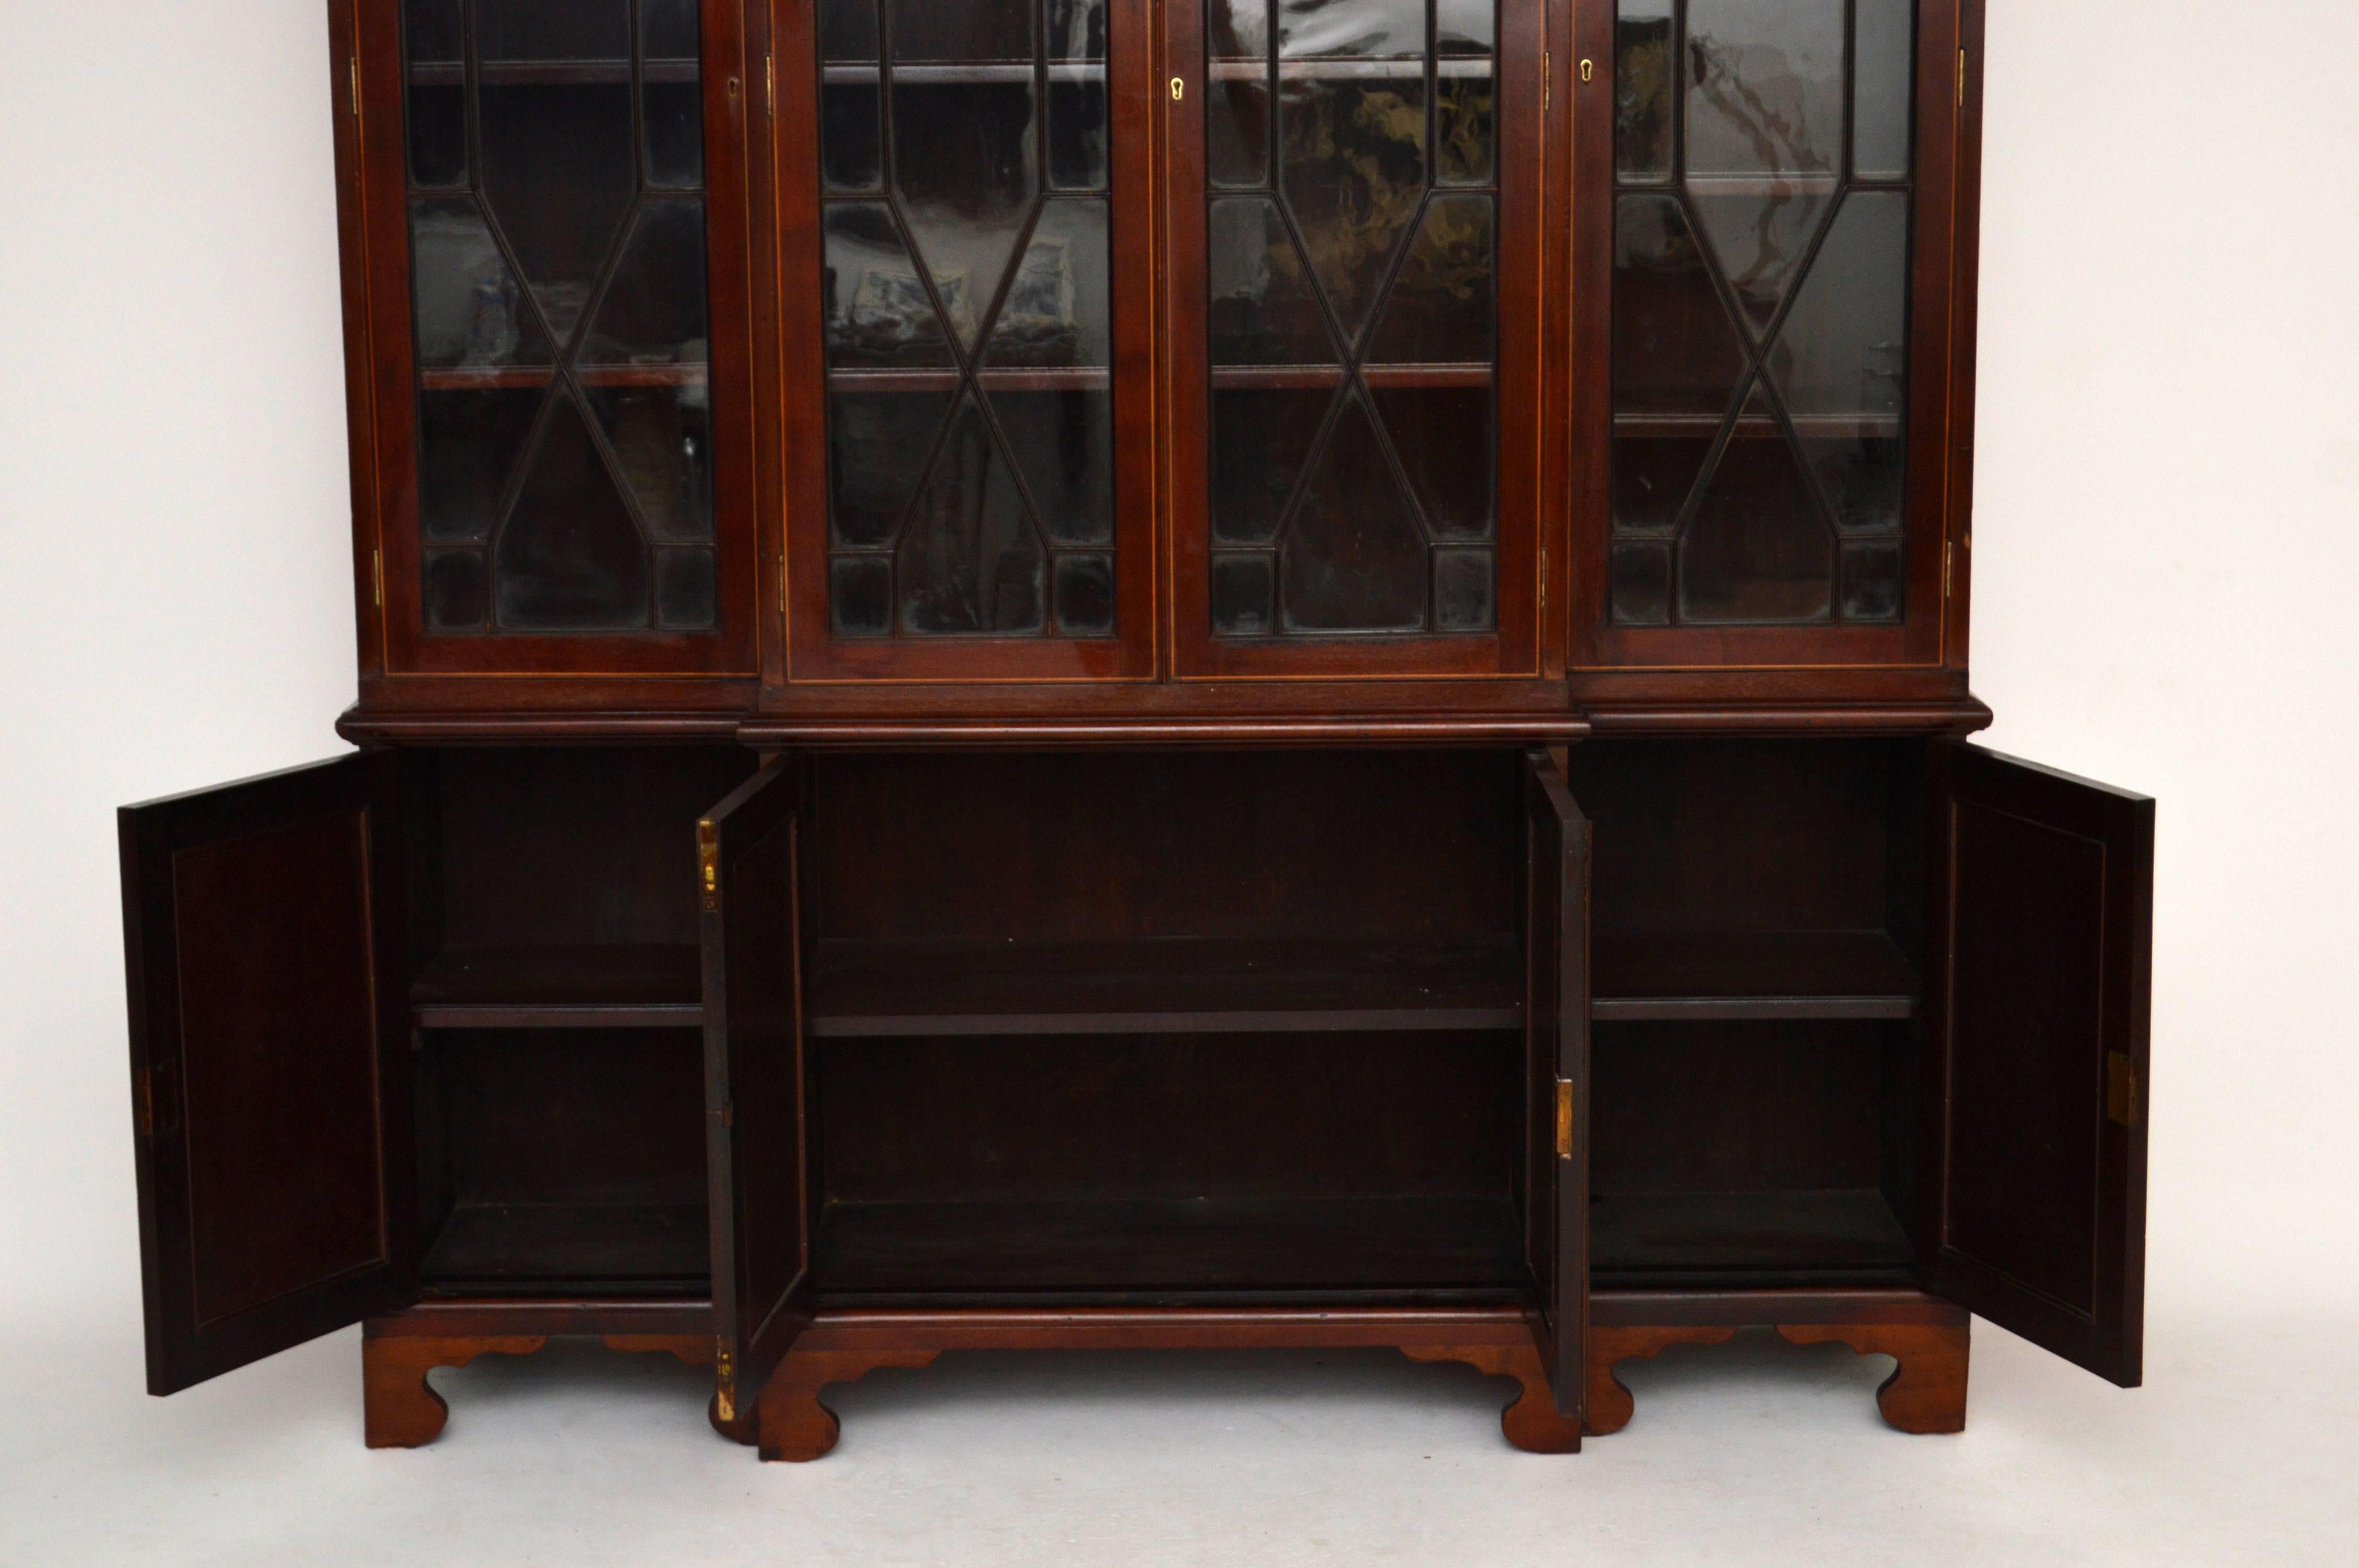 British Antique Mahogany Breakfront Bookcase with Stunning Satinwood Inlays